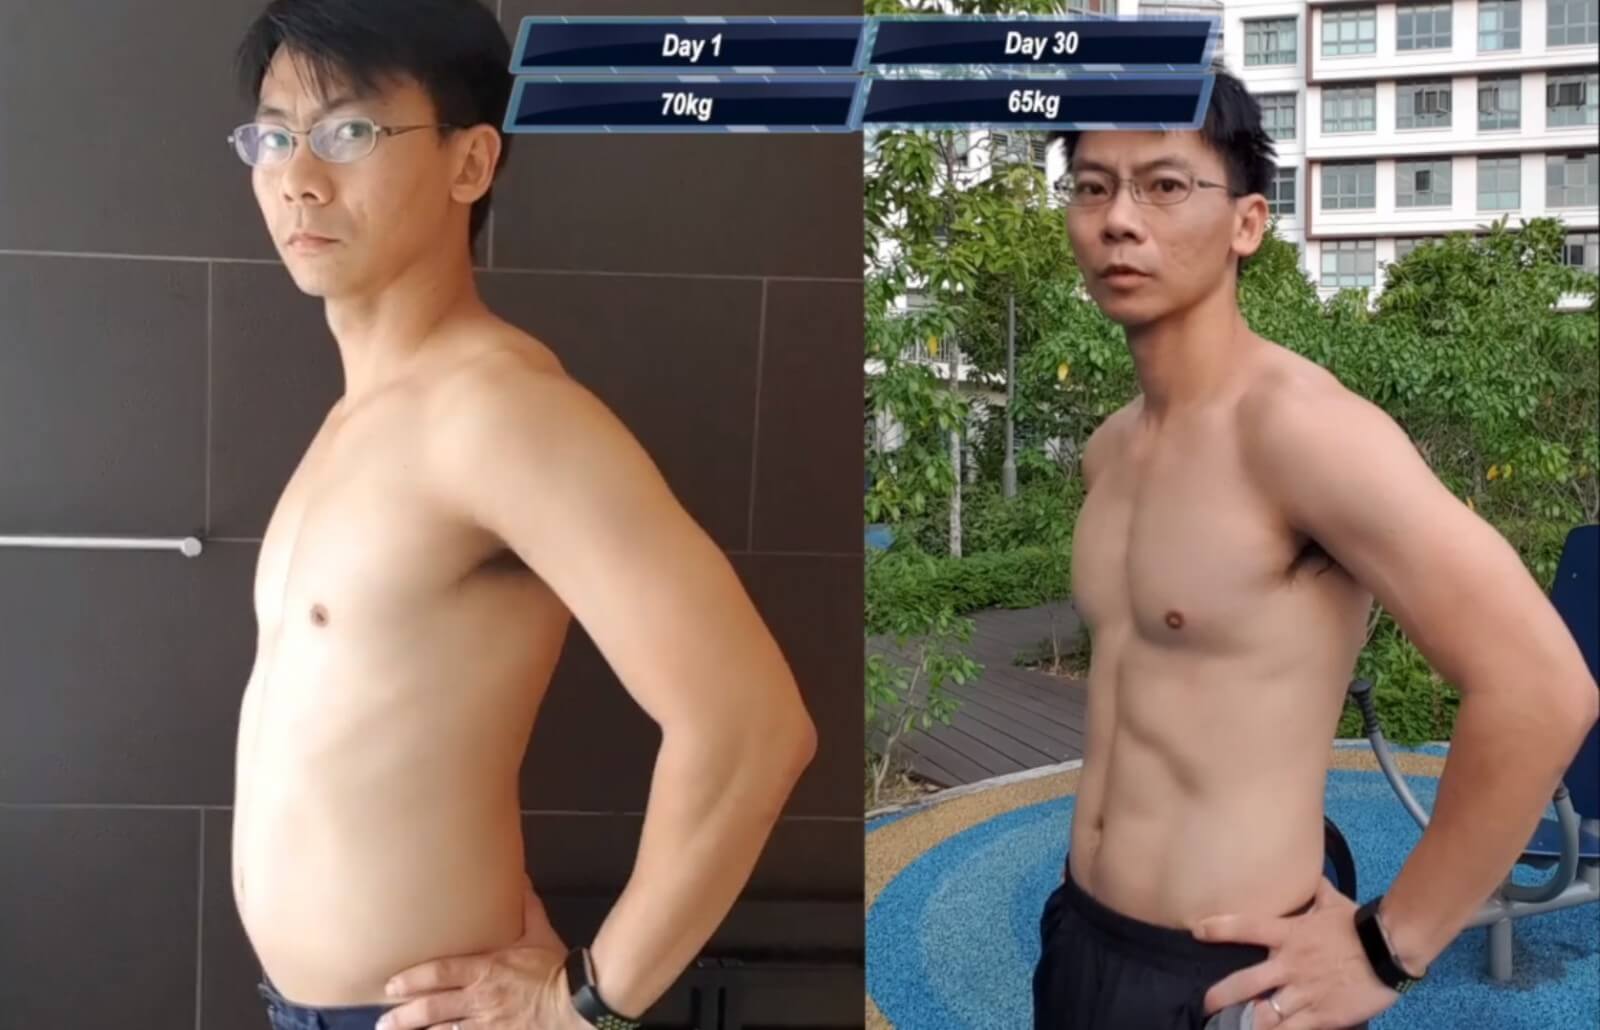 Man Completely Transforms His Body After Trying the One Punch Man Workout Challenge for 30 Days - WORLD OF BUZZ 1